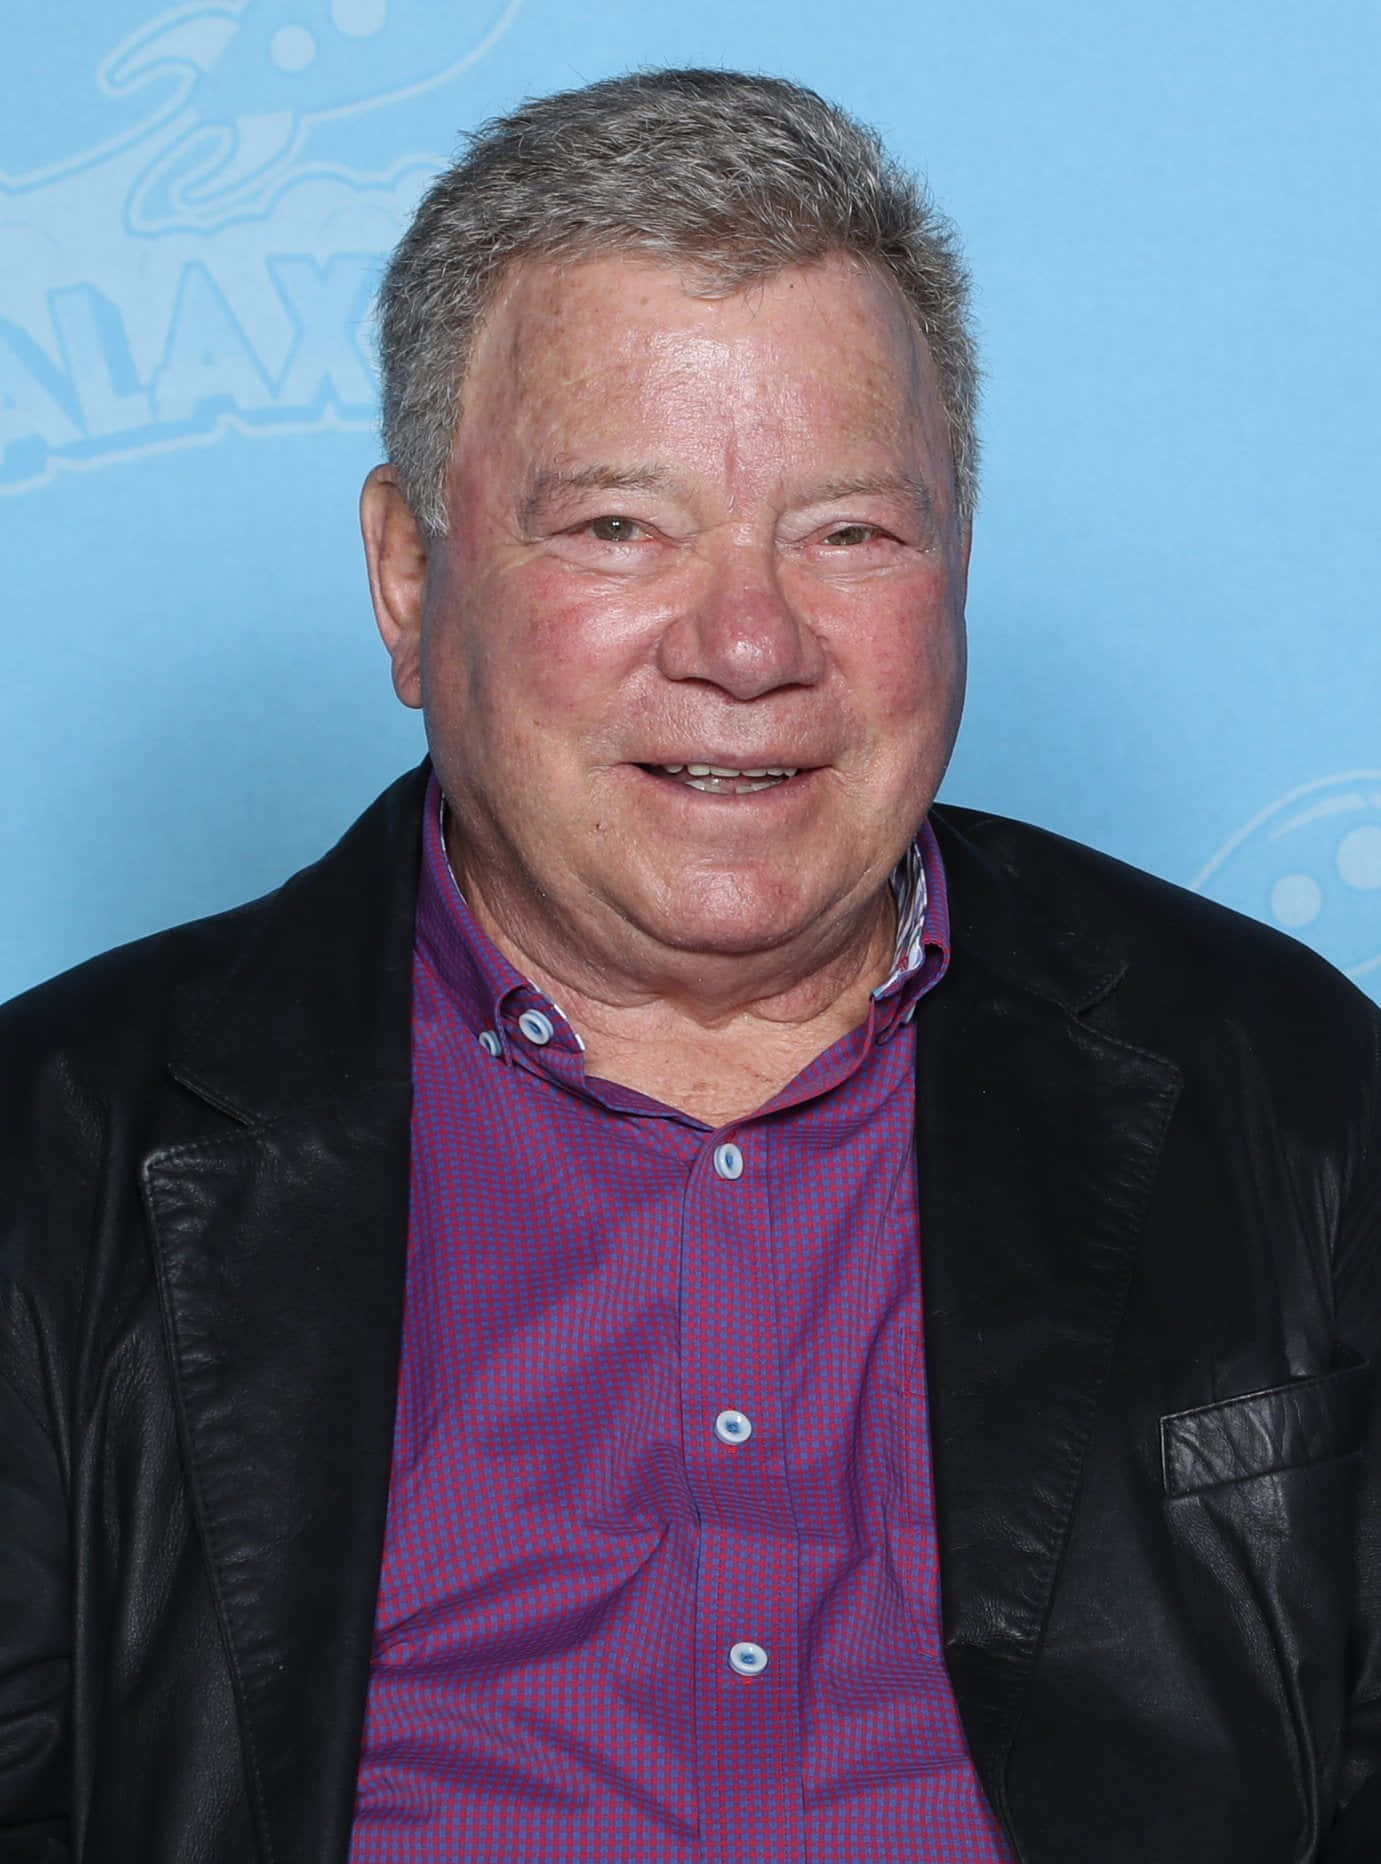 Legendary Actor William Shatner In A Thoughtful Pose Background